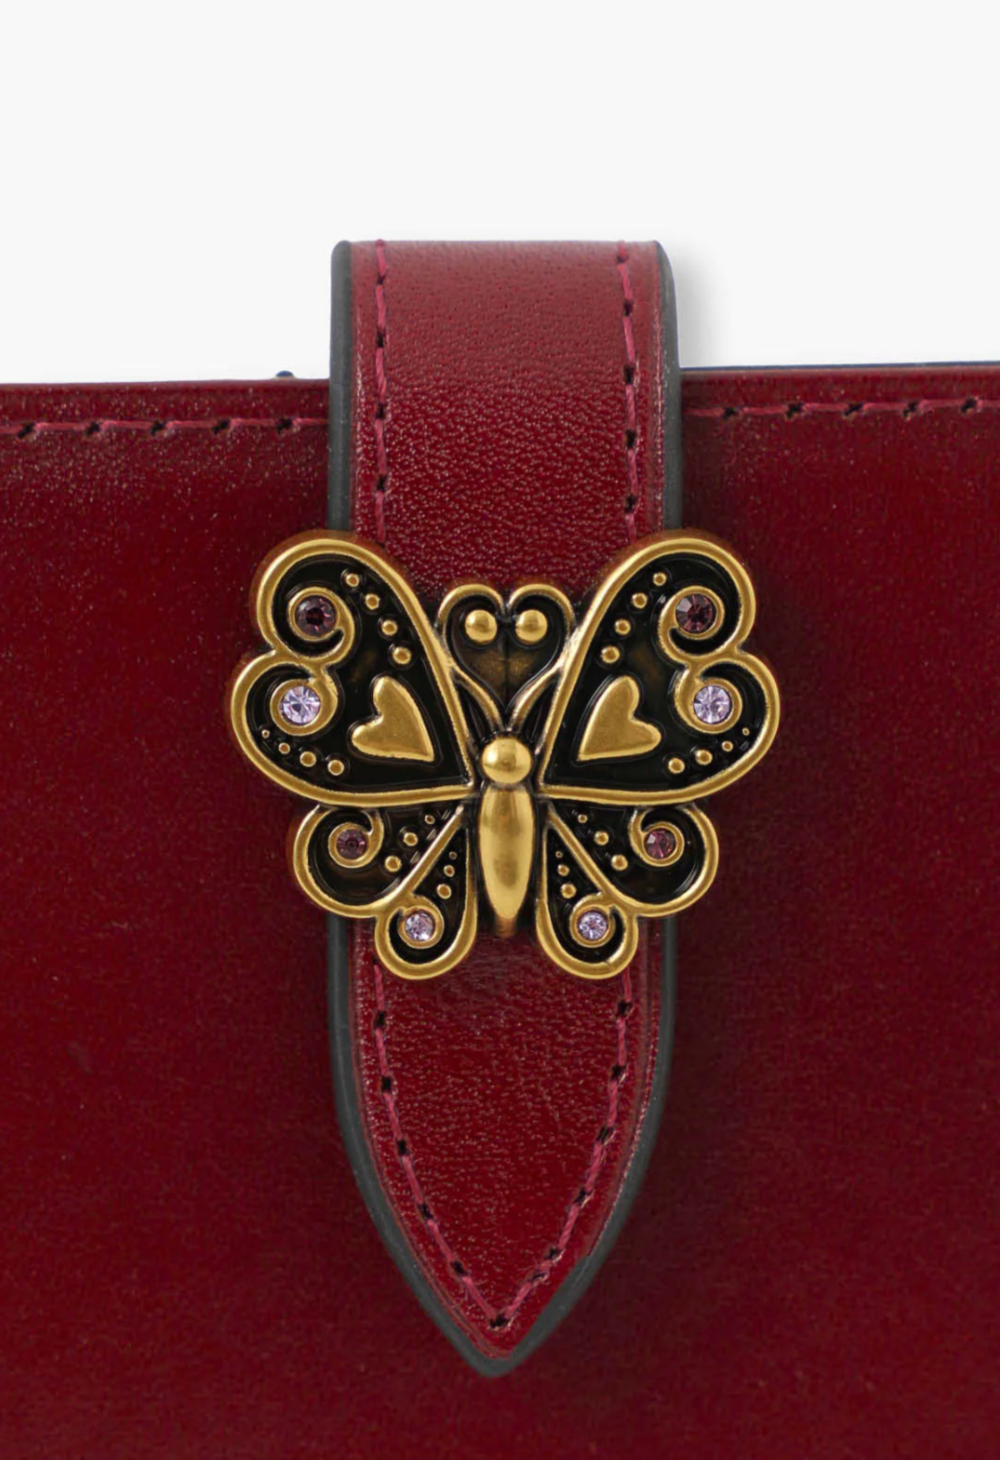 Roger Wallet wine detail of signature Anna Sui golden butterfly hardware on the flap of the wallet